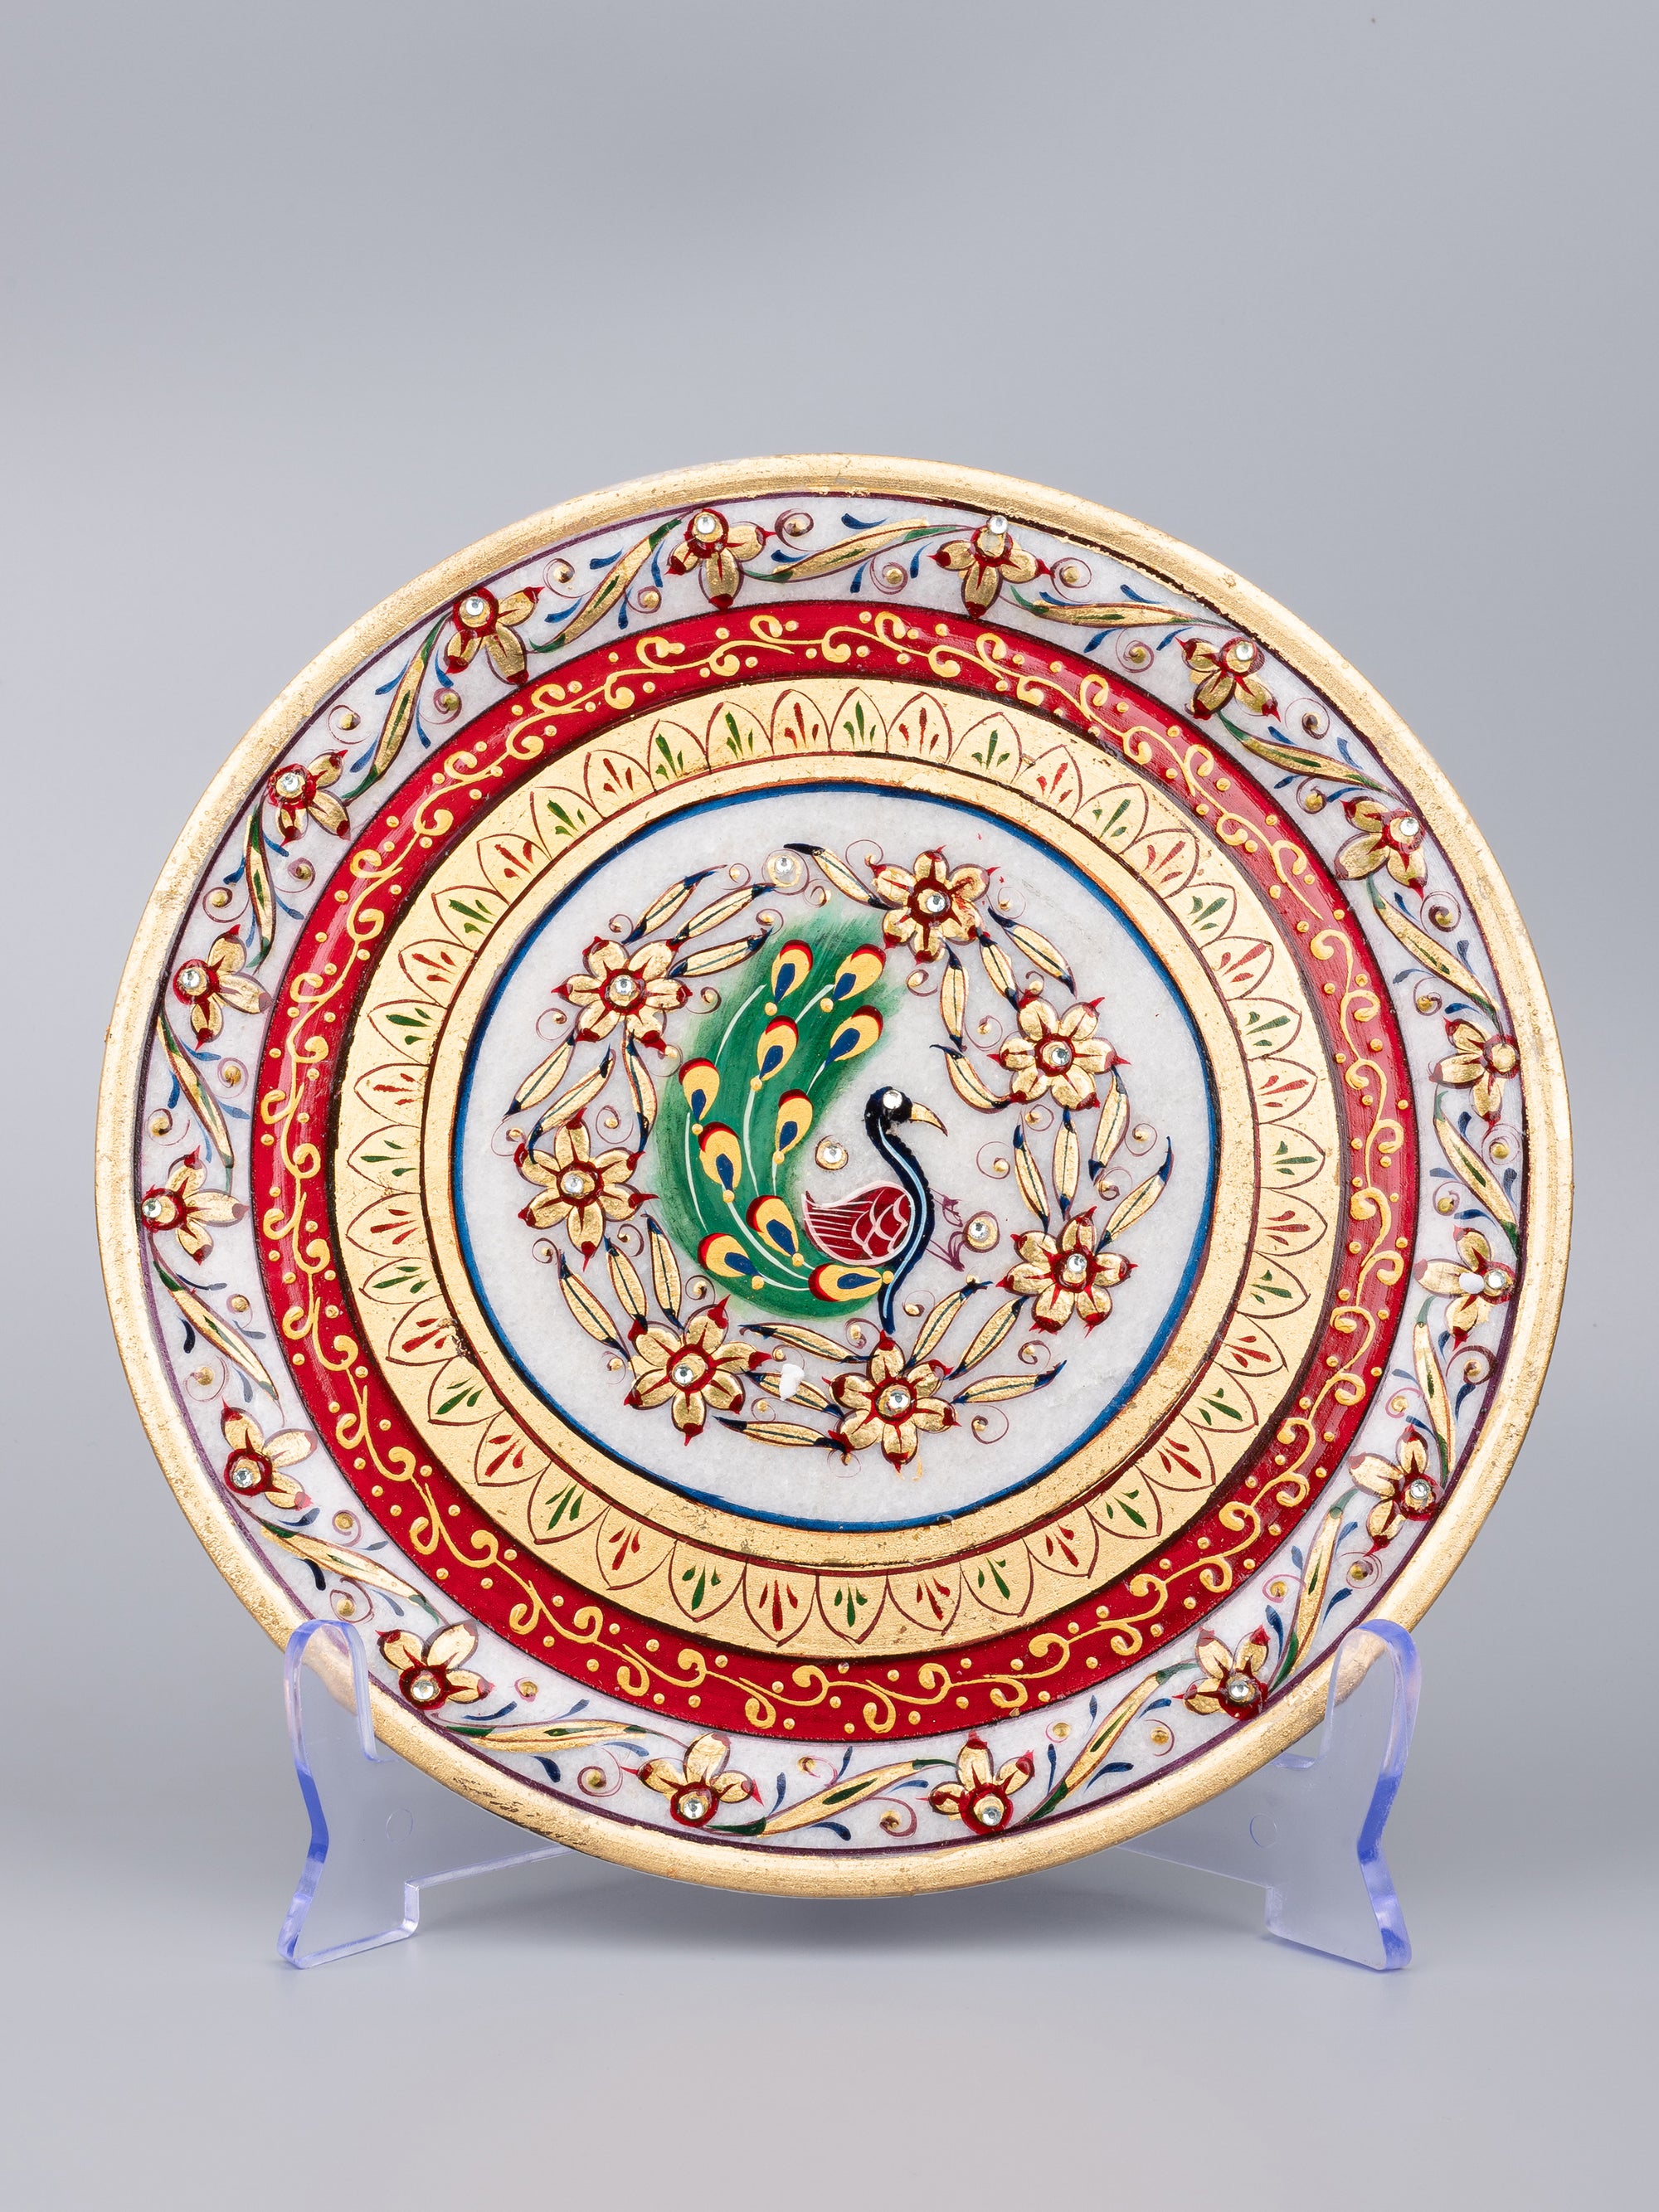 9 inches decorative marble plate with red and yellow meenakari painting - The Heritage Artifacts